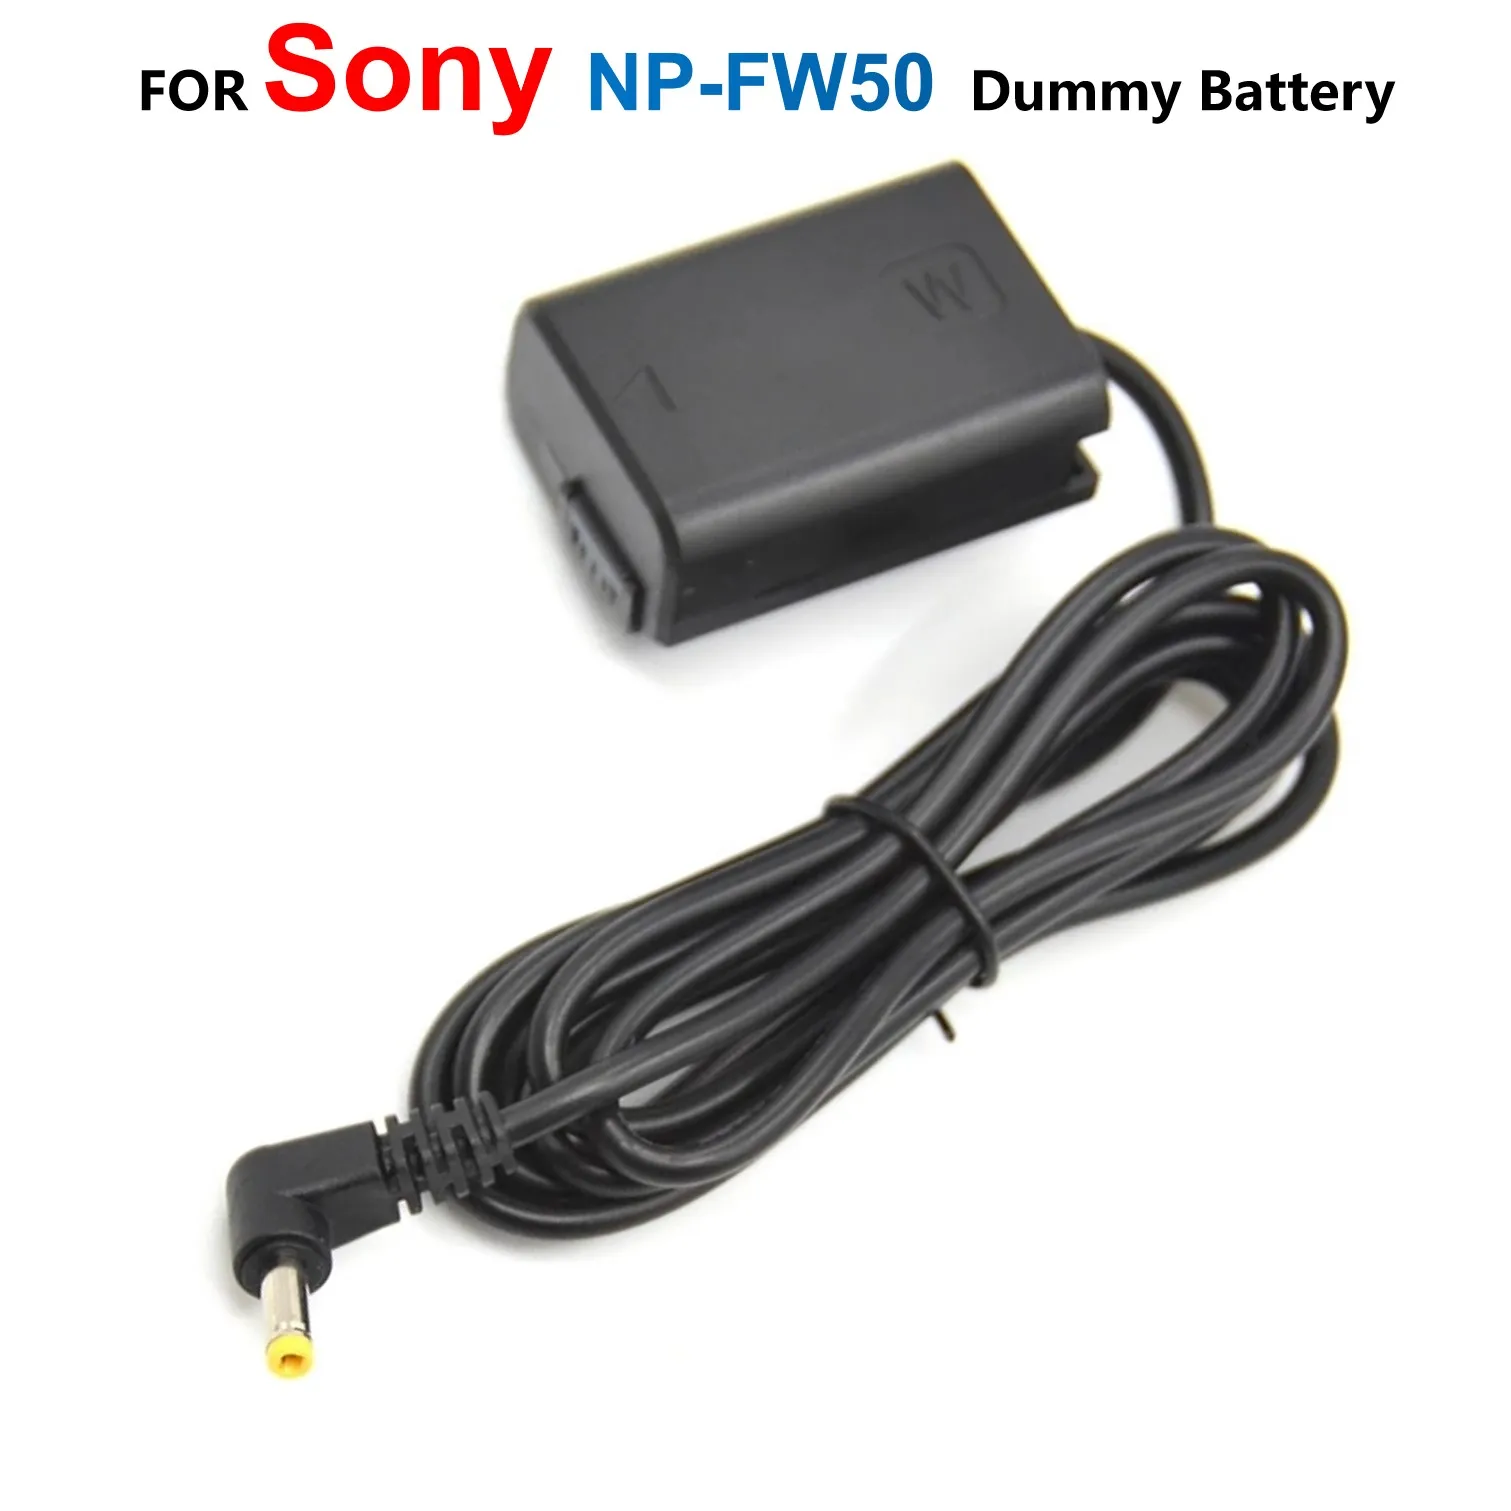 

NP-FW50 NPFW50 Dummy Battery AC-PW20 DC Coupler 4.0*1.7mm Male For Sony A6000 A6300 A6500 A7000 a7 a7R NEX5 SLT A65 A77 ZV-E10